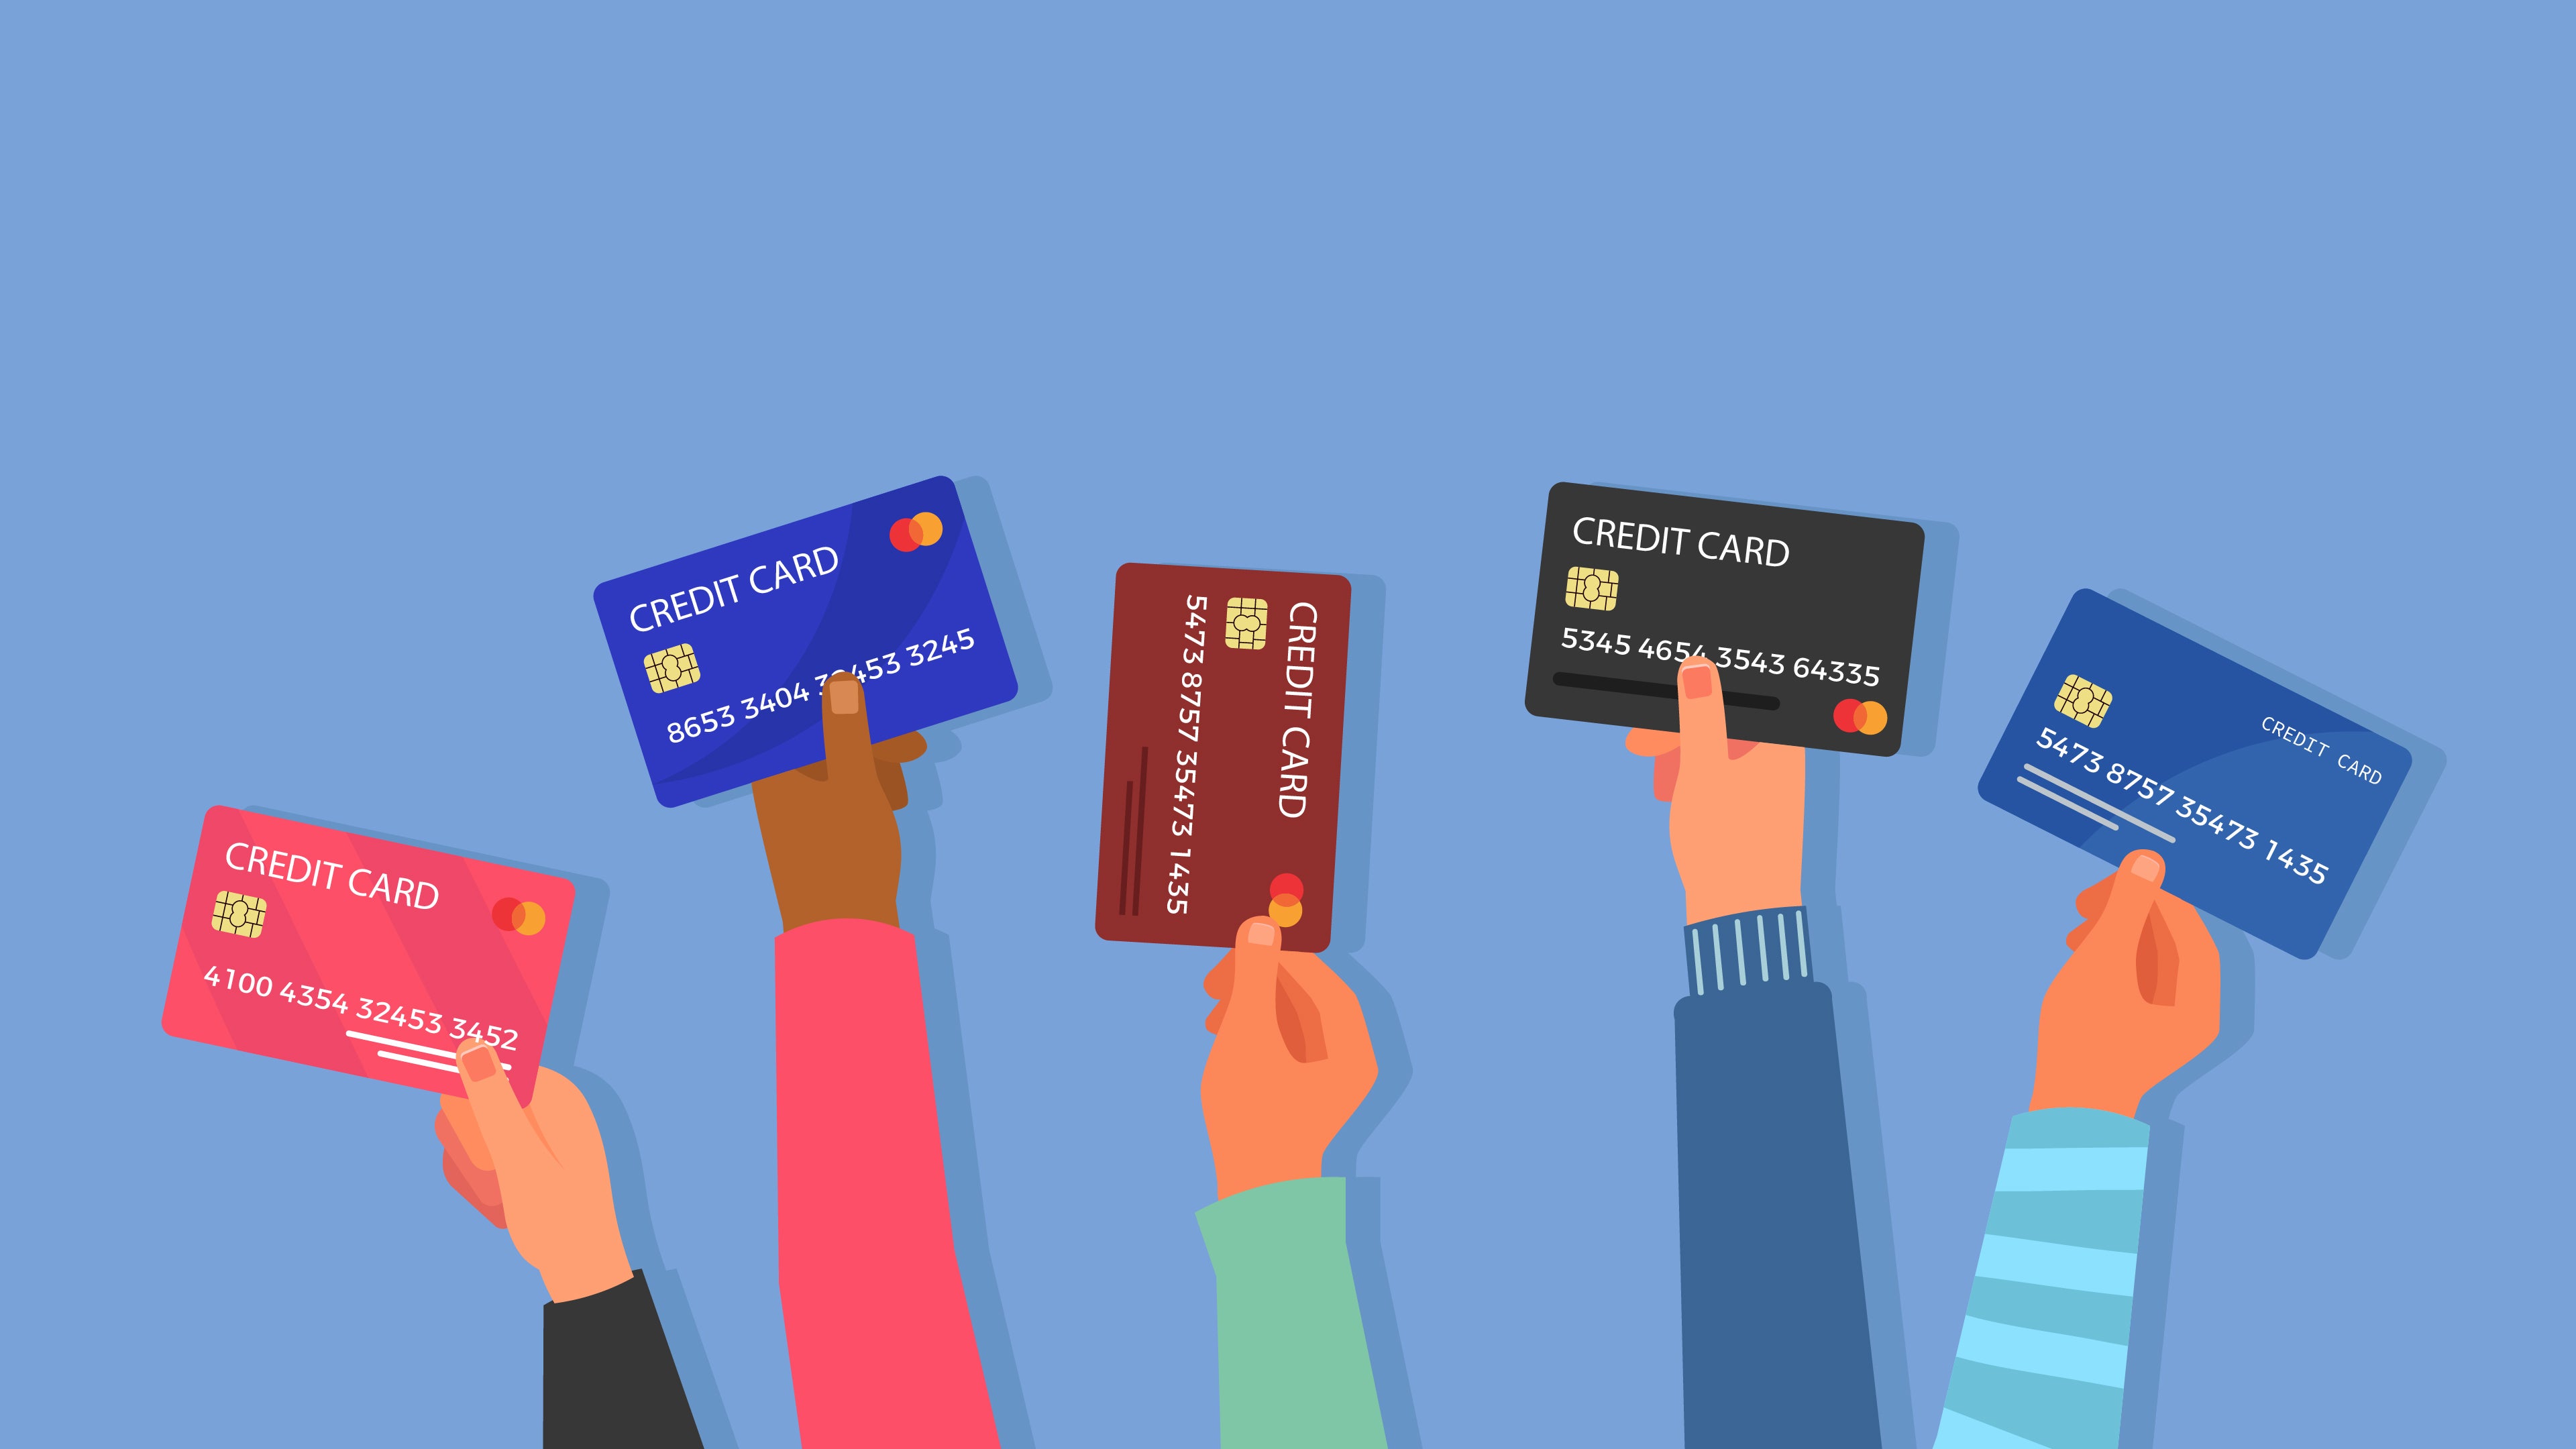 States with the Highest Number of Credit Card Holders Revealed by Upgraded Points